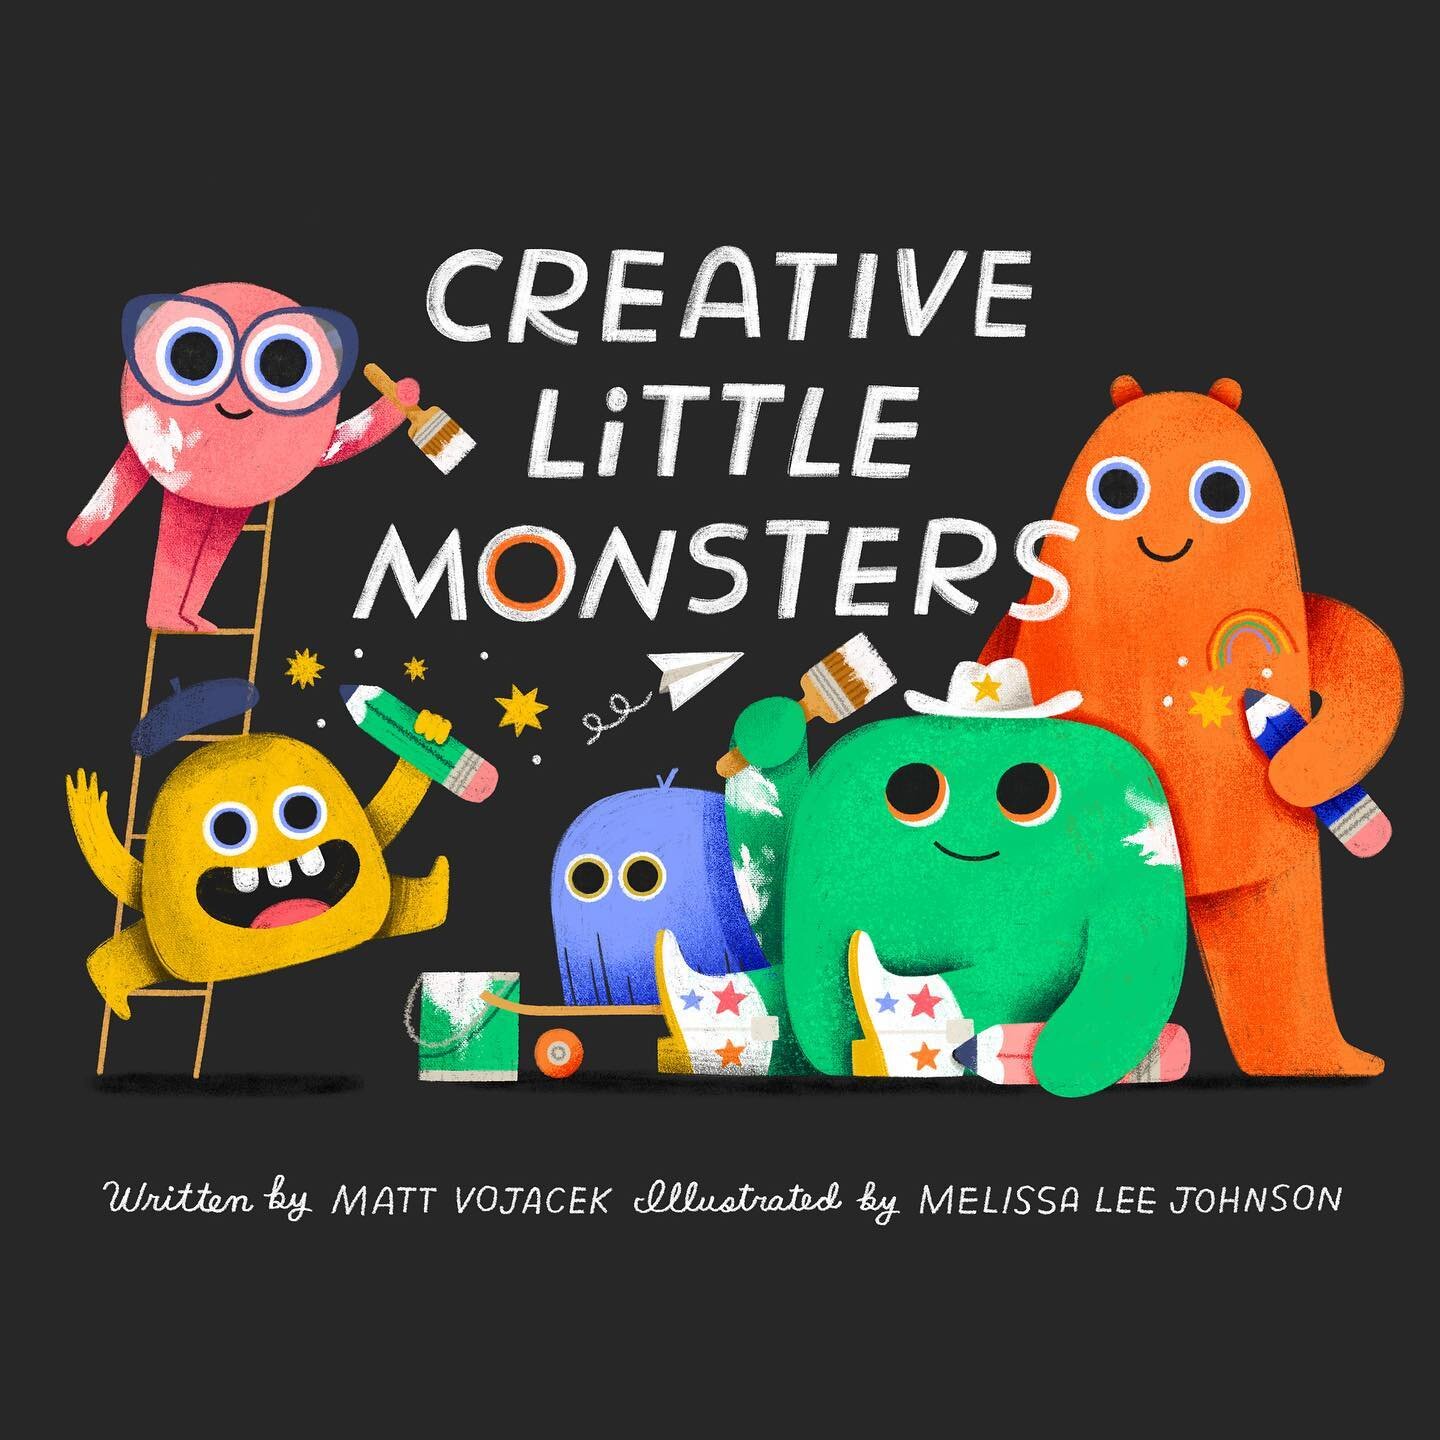 Big new project incoming! I&rsquo;m working on a children&rsquo;s book called Creative Little Monsters 👹 

Creative Little Monsters is about the messy crazy creativity we all had as kids. I personally remember a huge refrigerator cardboard box being